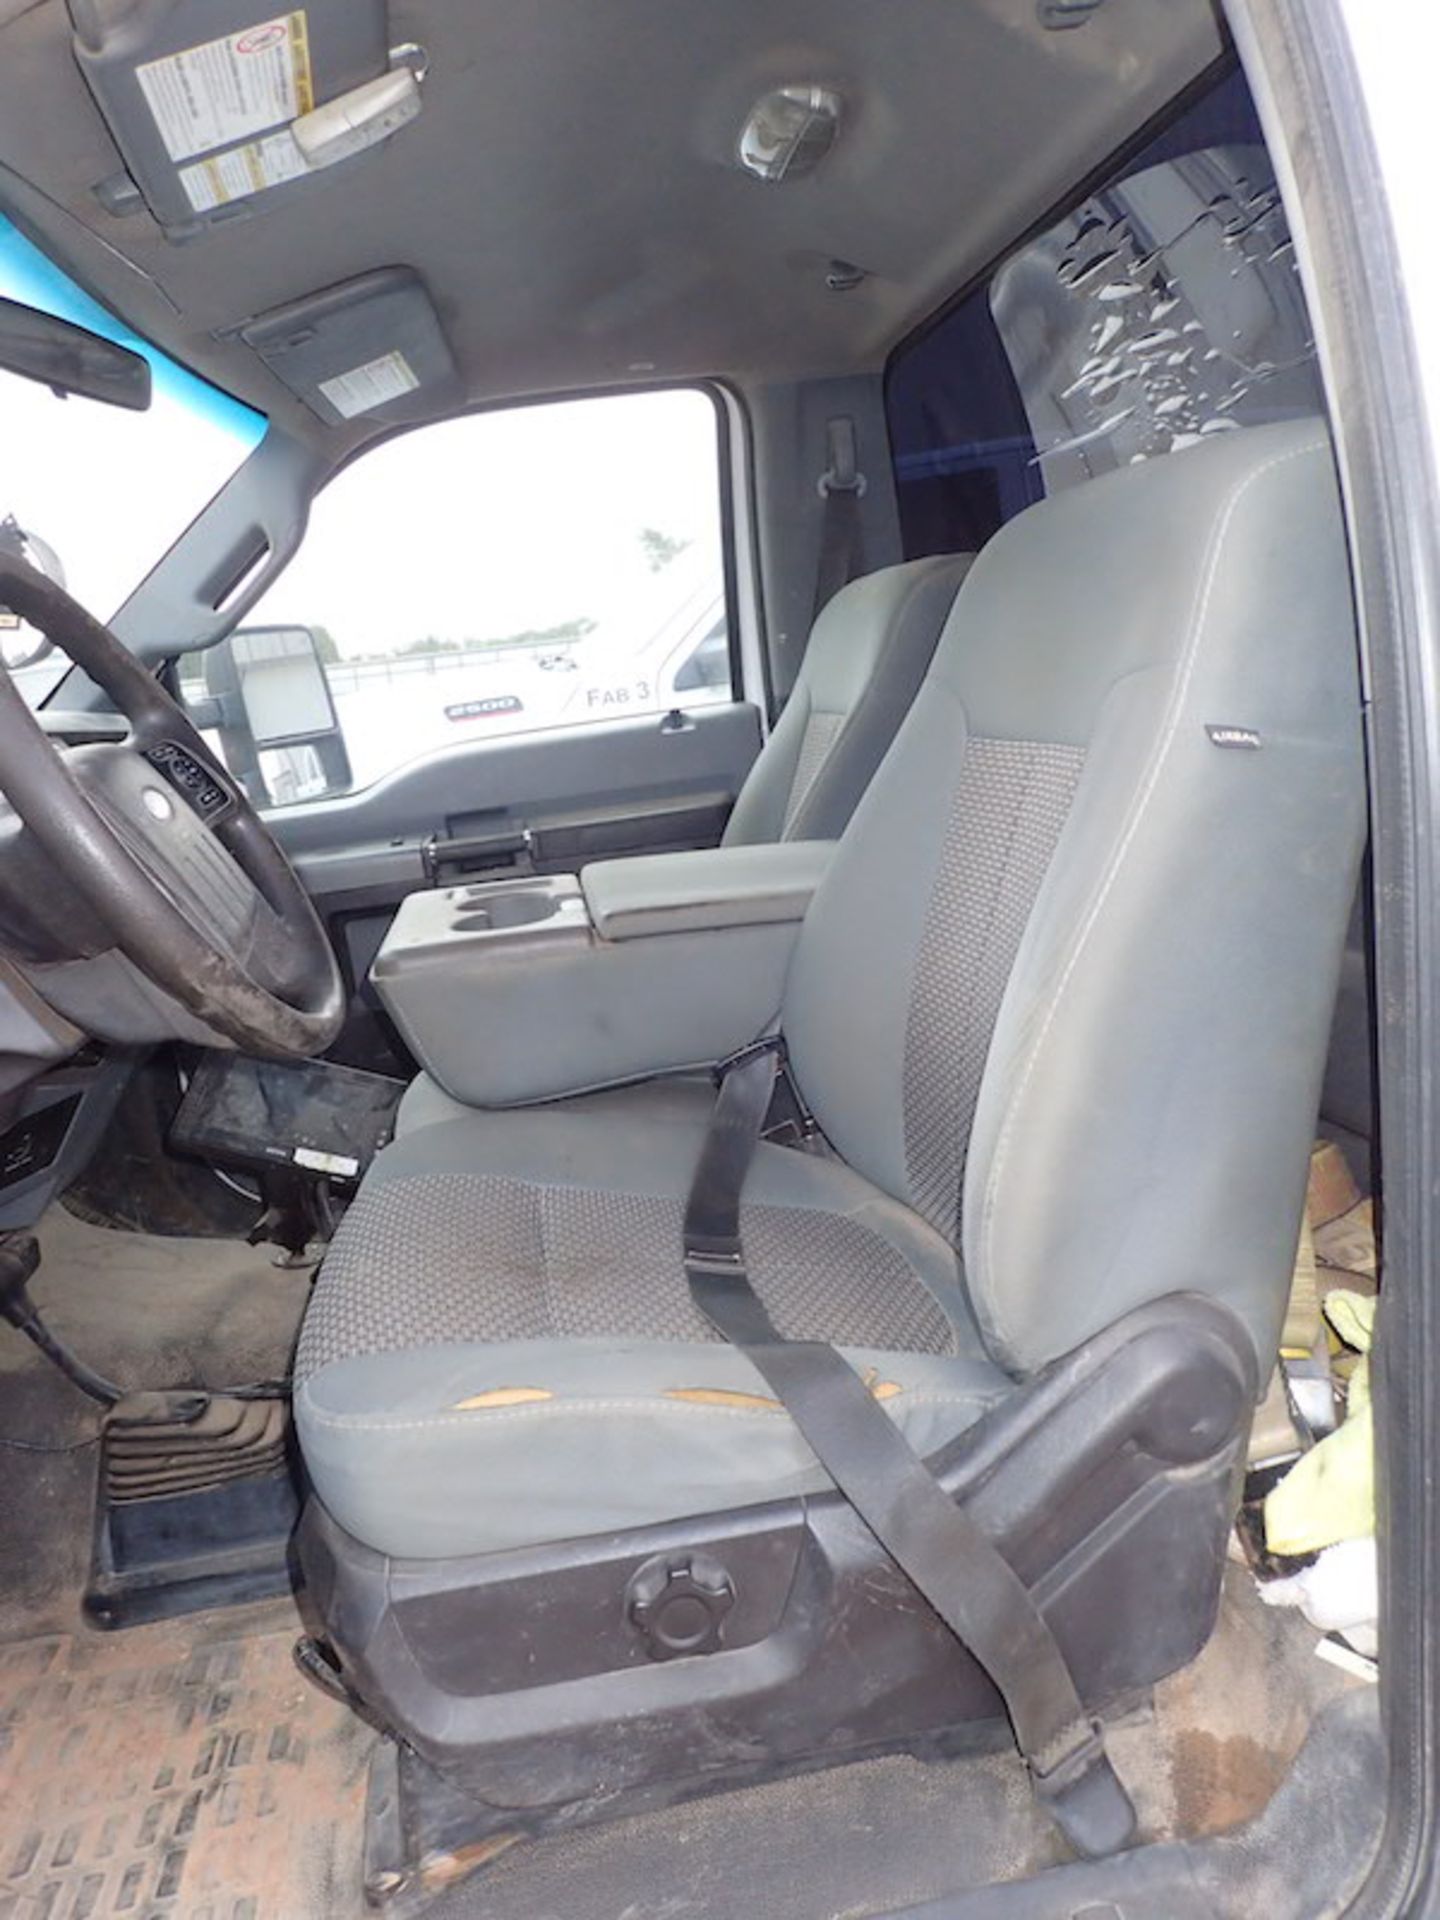 2012 Ford F-550 XLT Super Duty Regular Cab 4 x4 Truck Chassis, VIN: 1FDUF5HT5CEB01856; - Image 27 of 31